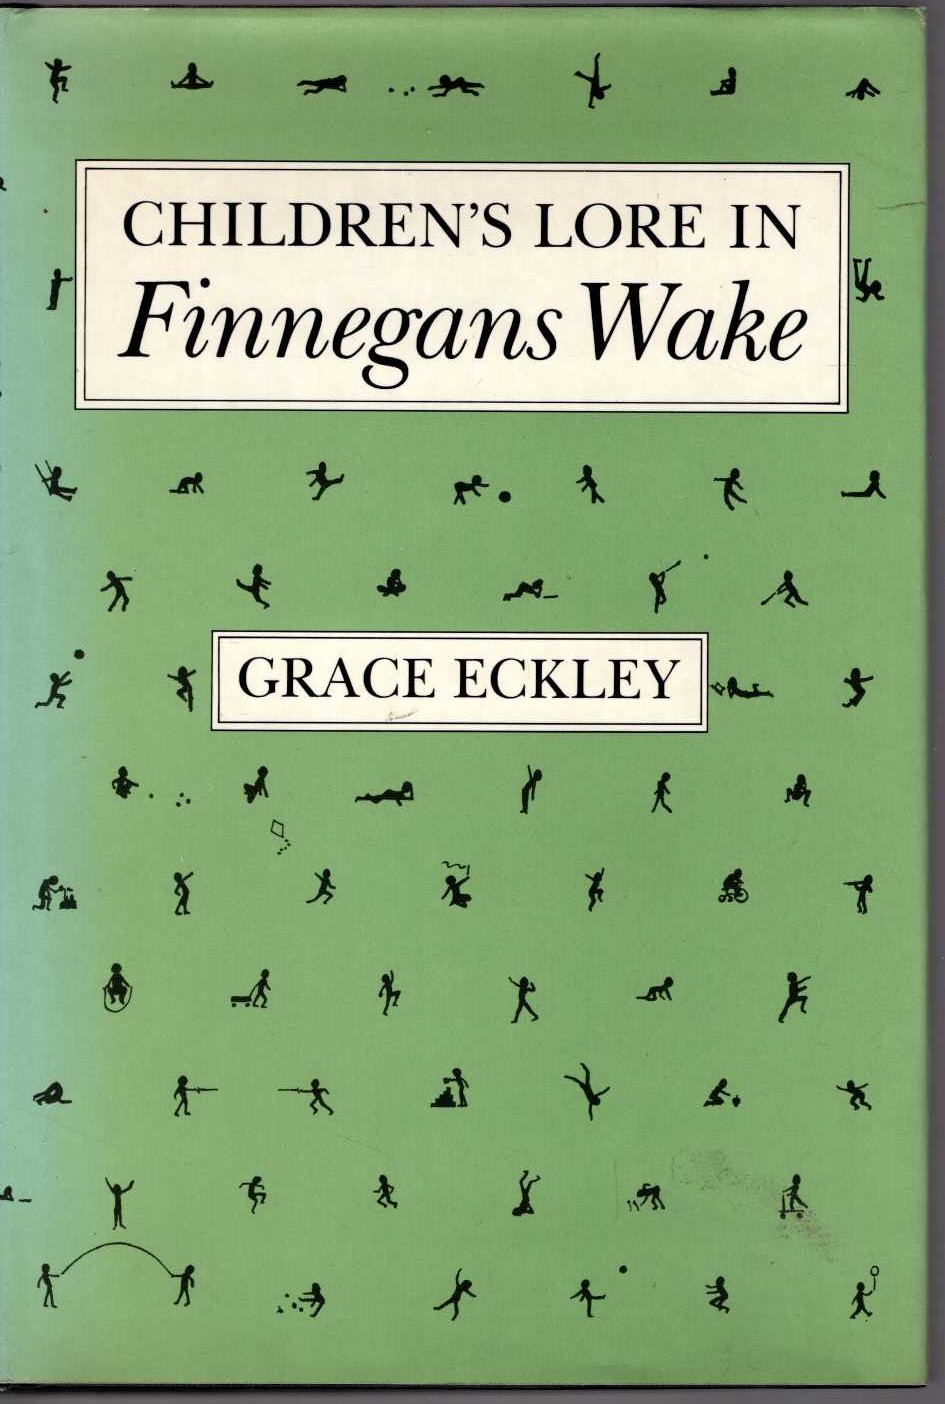 CHILDREN'S LORE IN FINNEGANS WAKE front book cover image